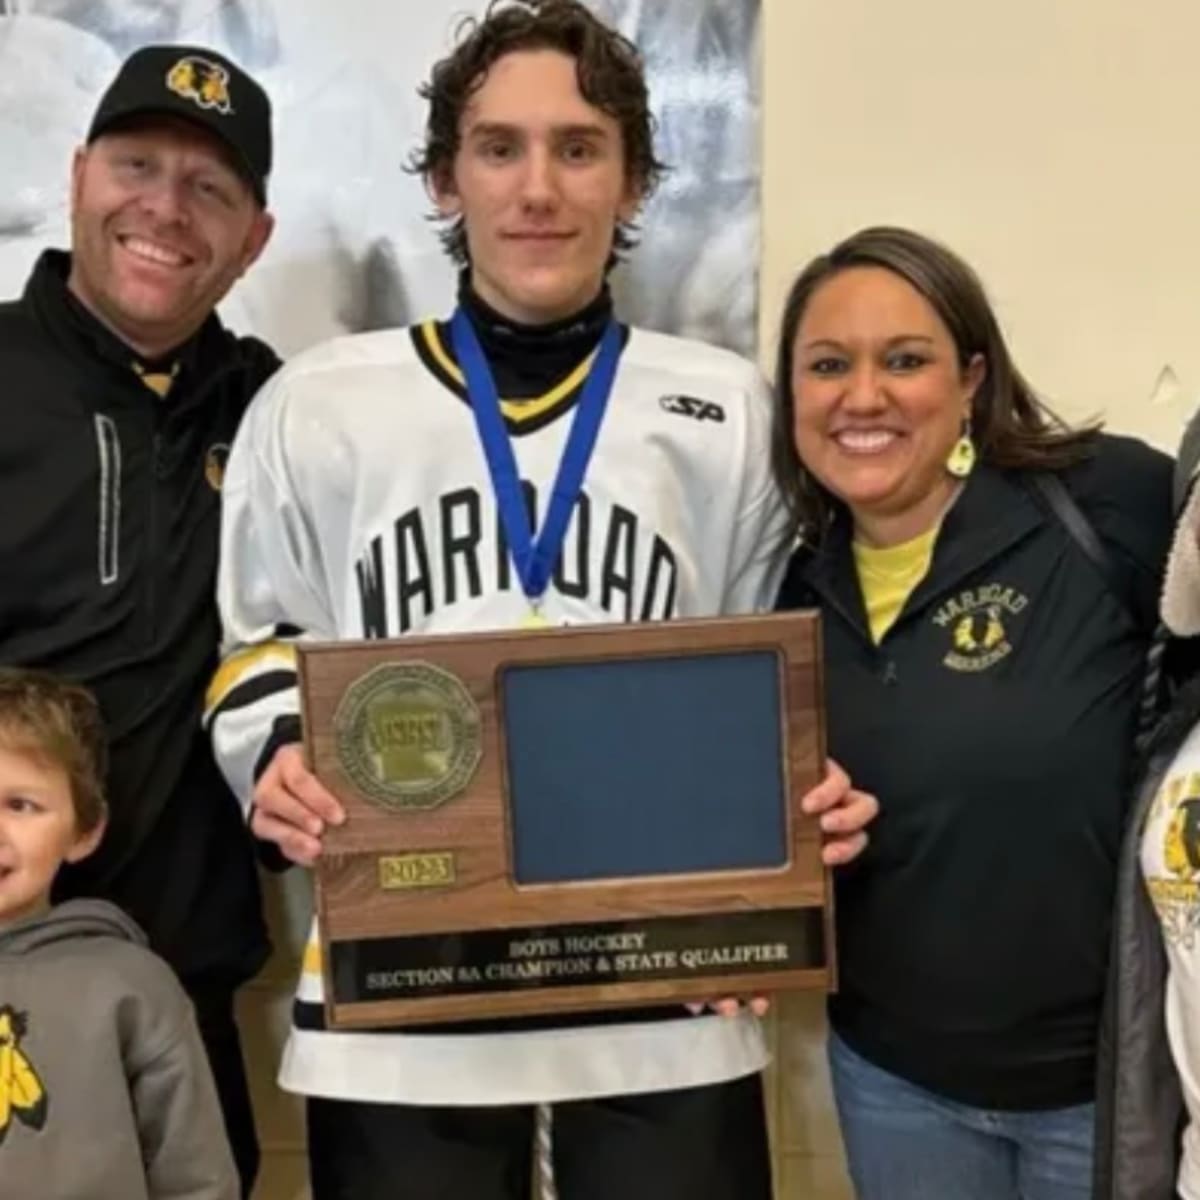 Warroad's T.J. Oshie nets emotional hat trick day after father's